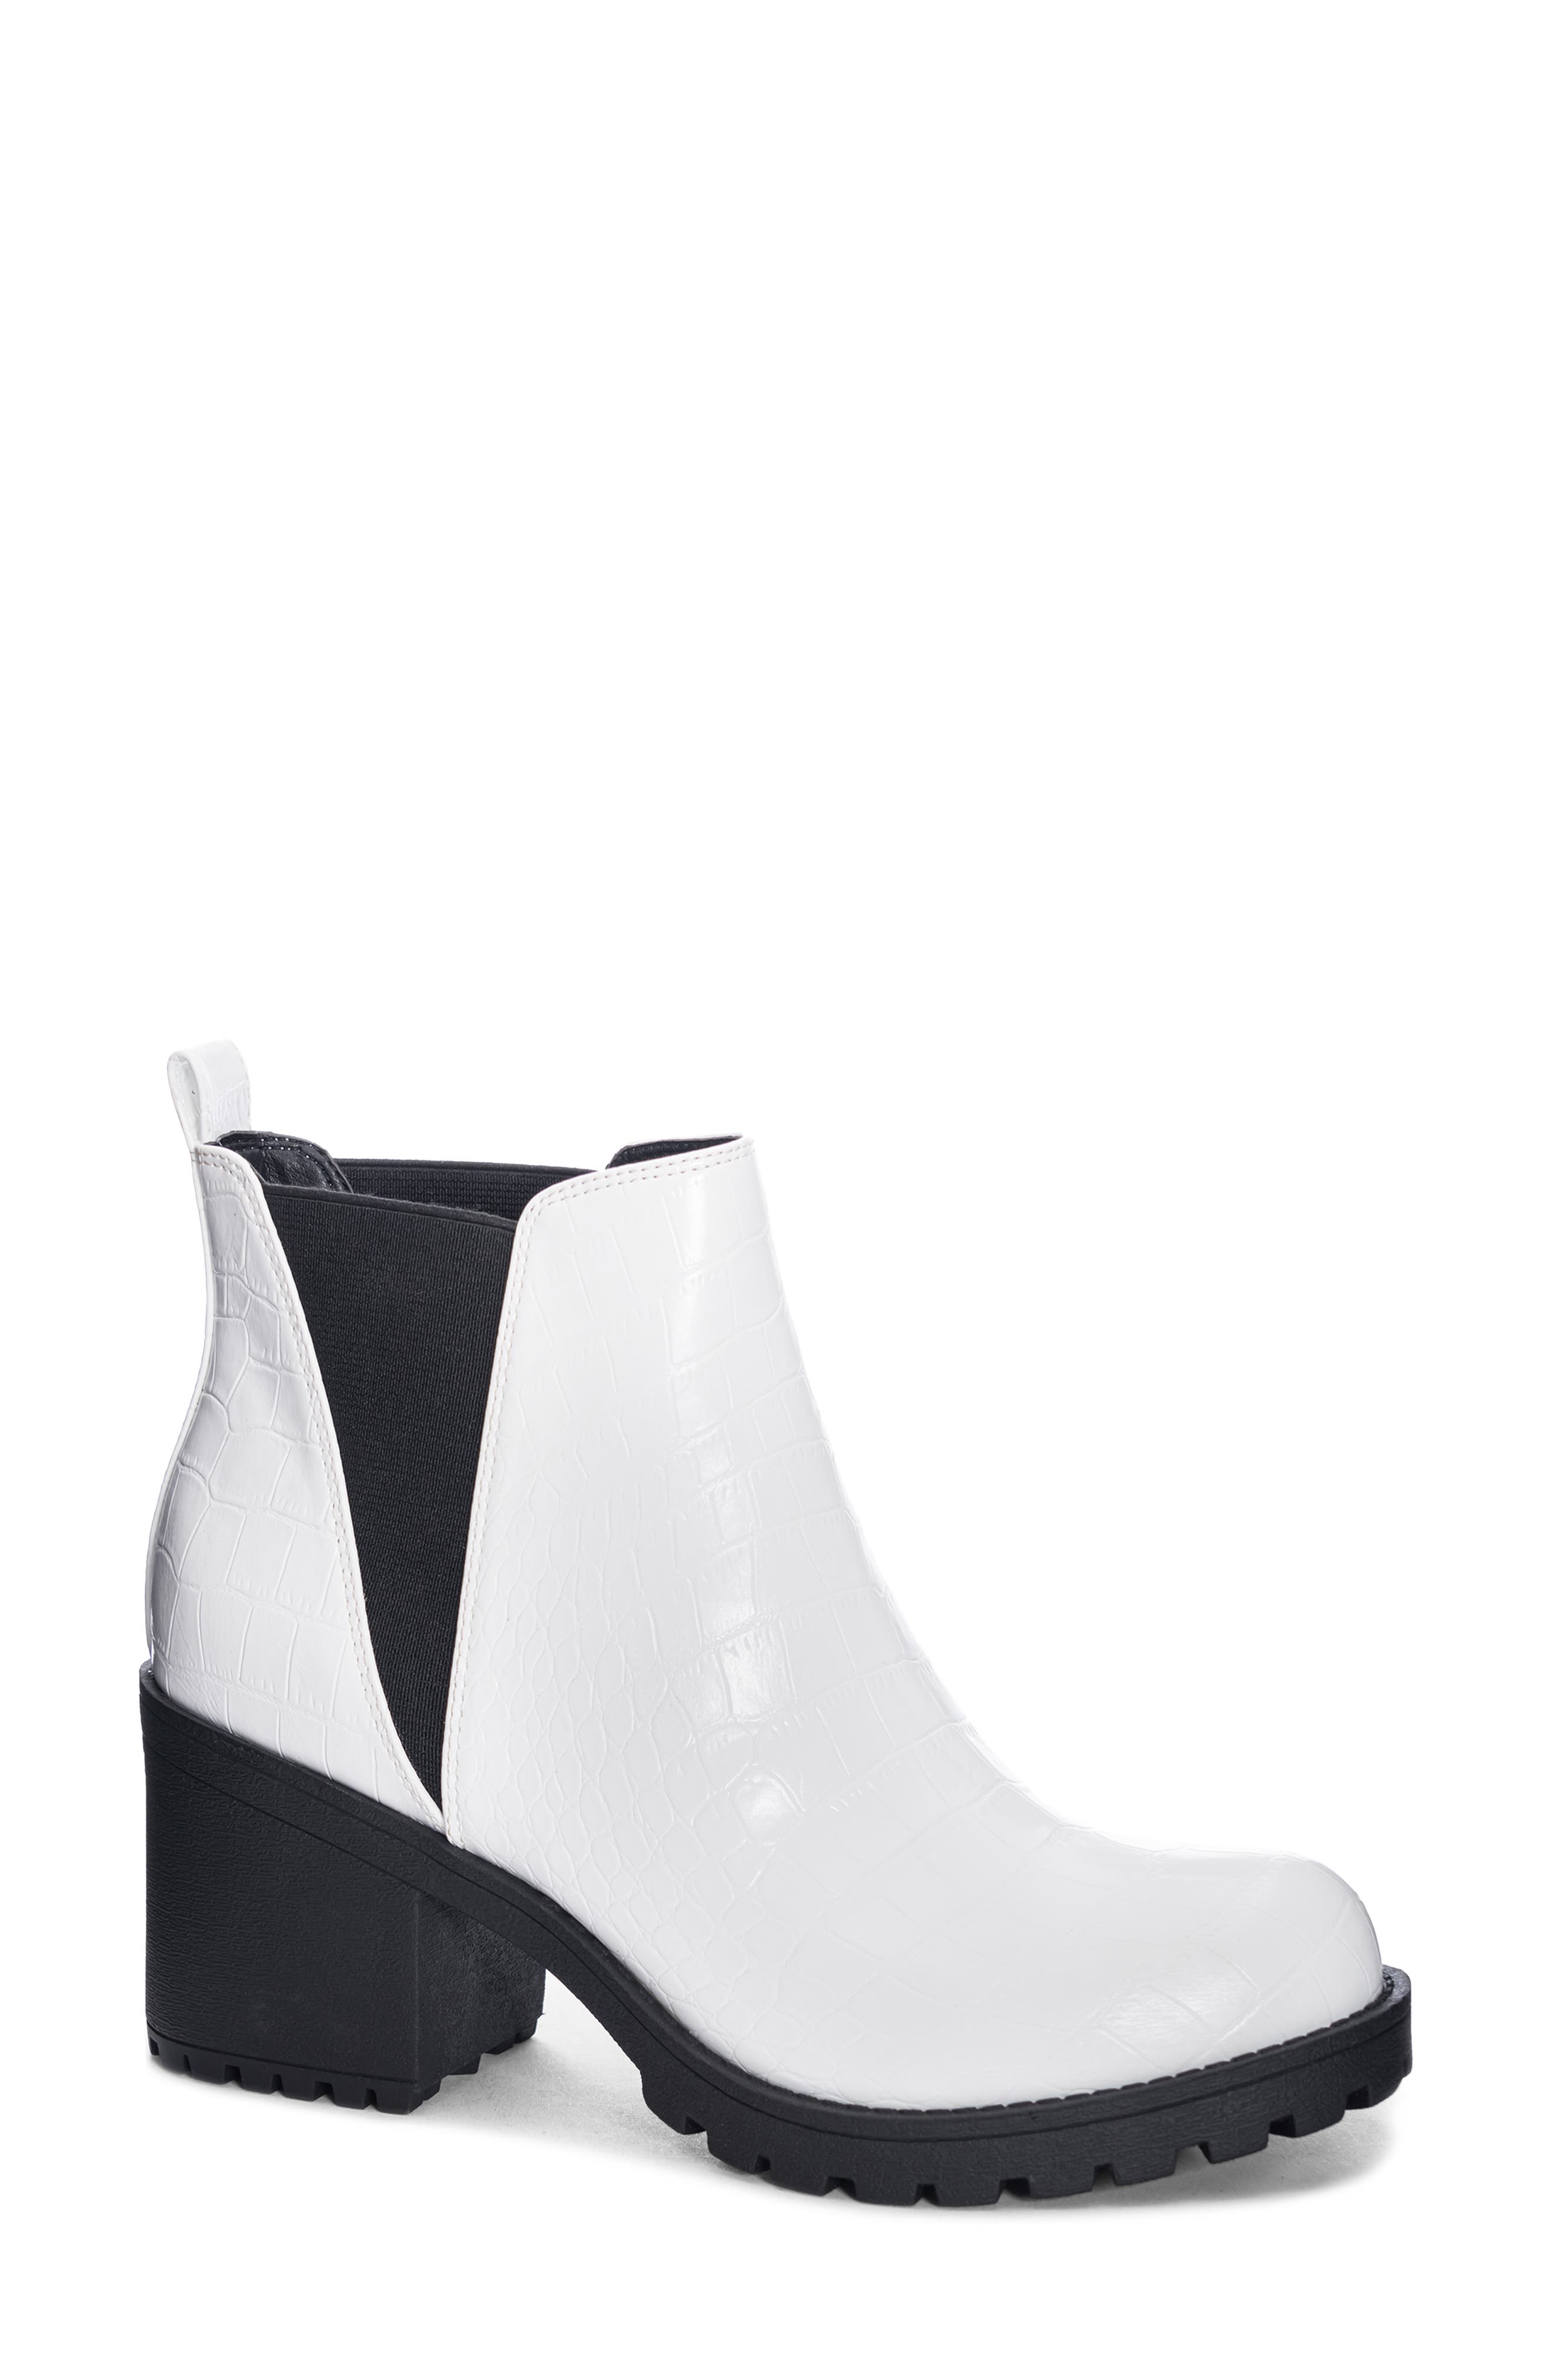 white ankle boots nordstrom